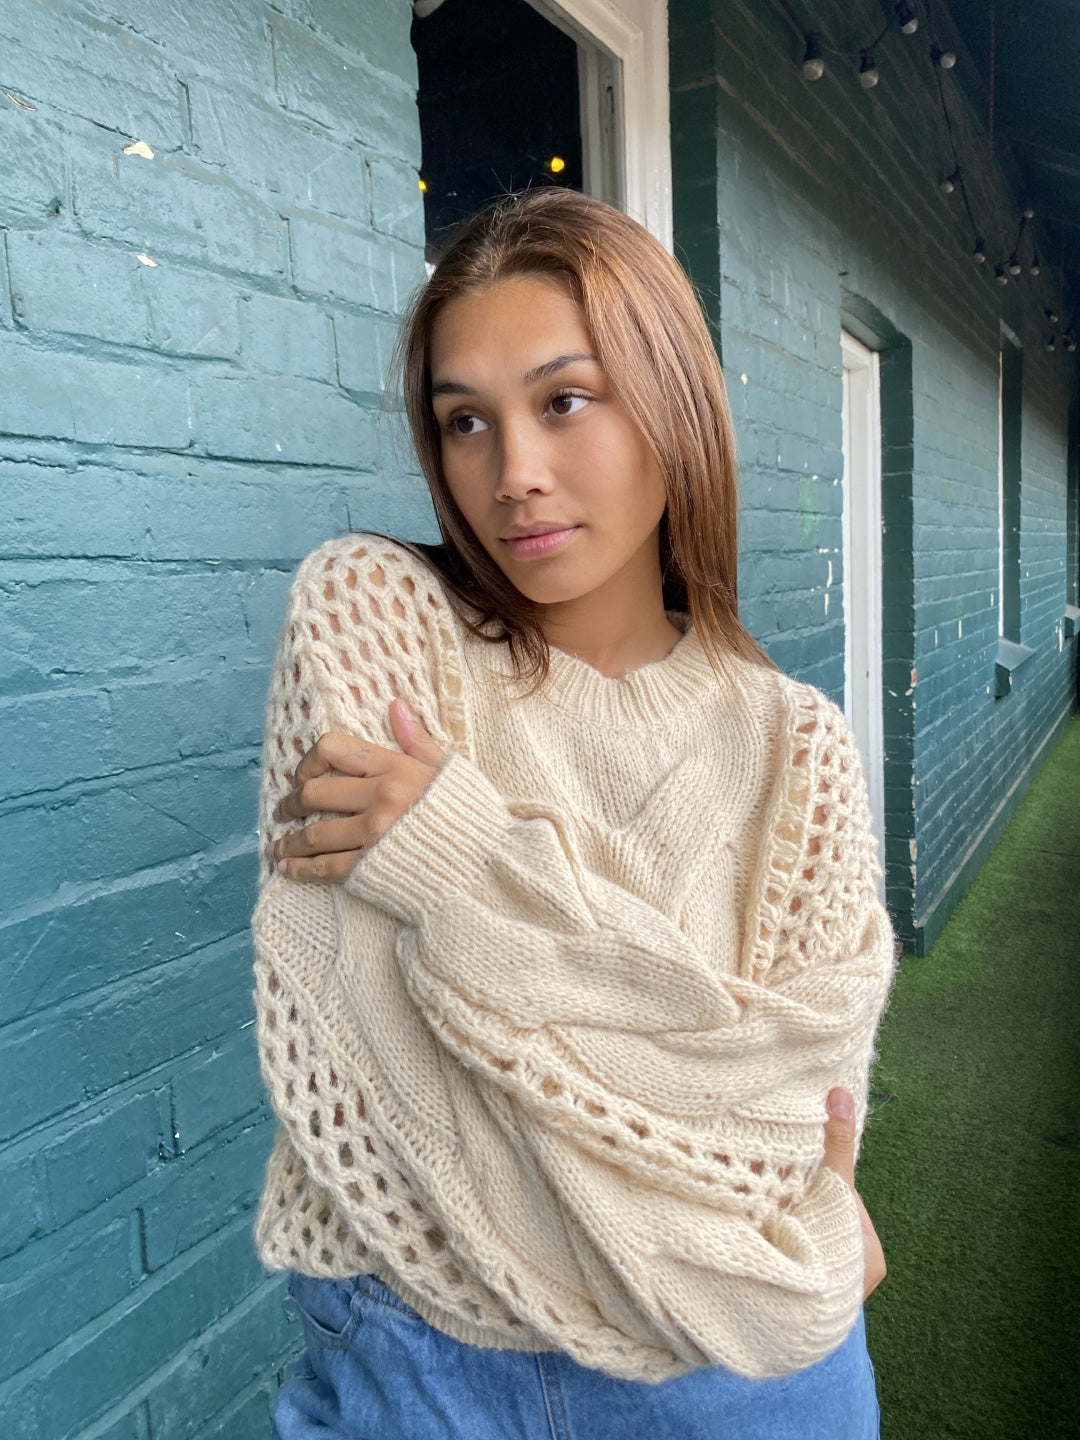 The Peachy Keen Knit from Peach and Parla